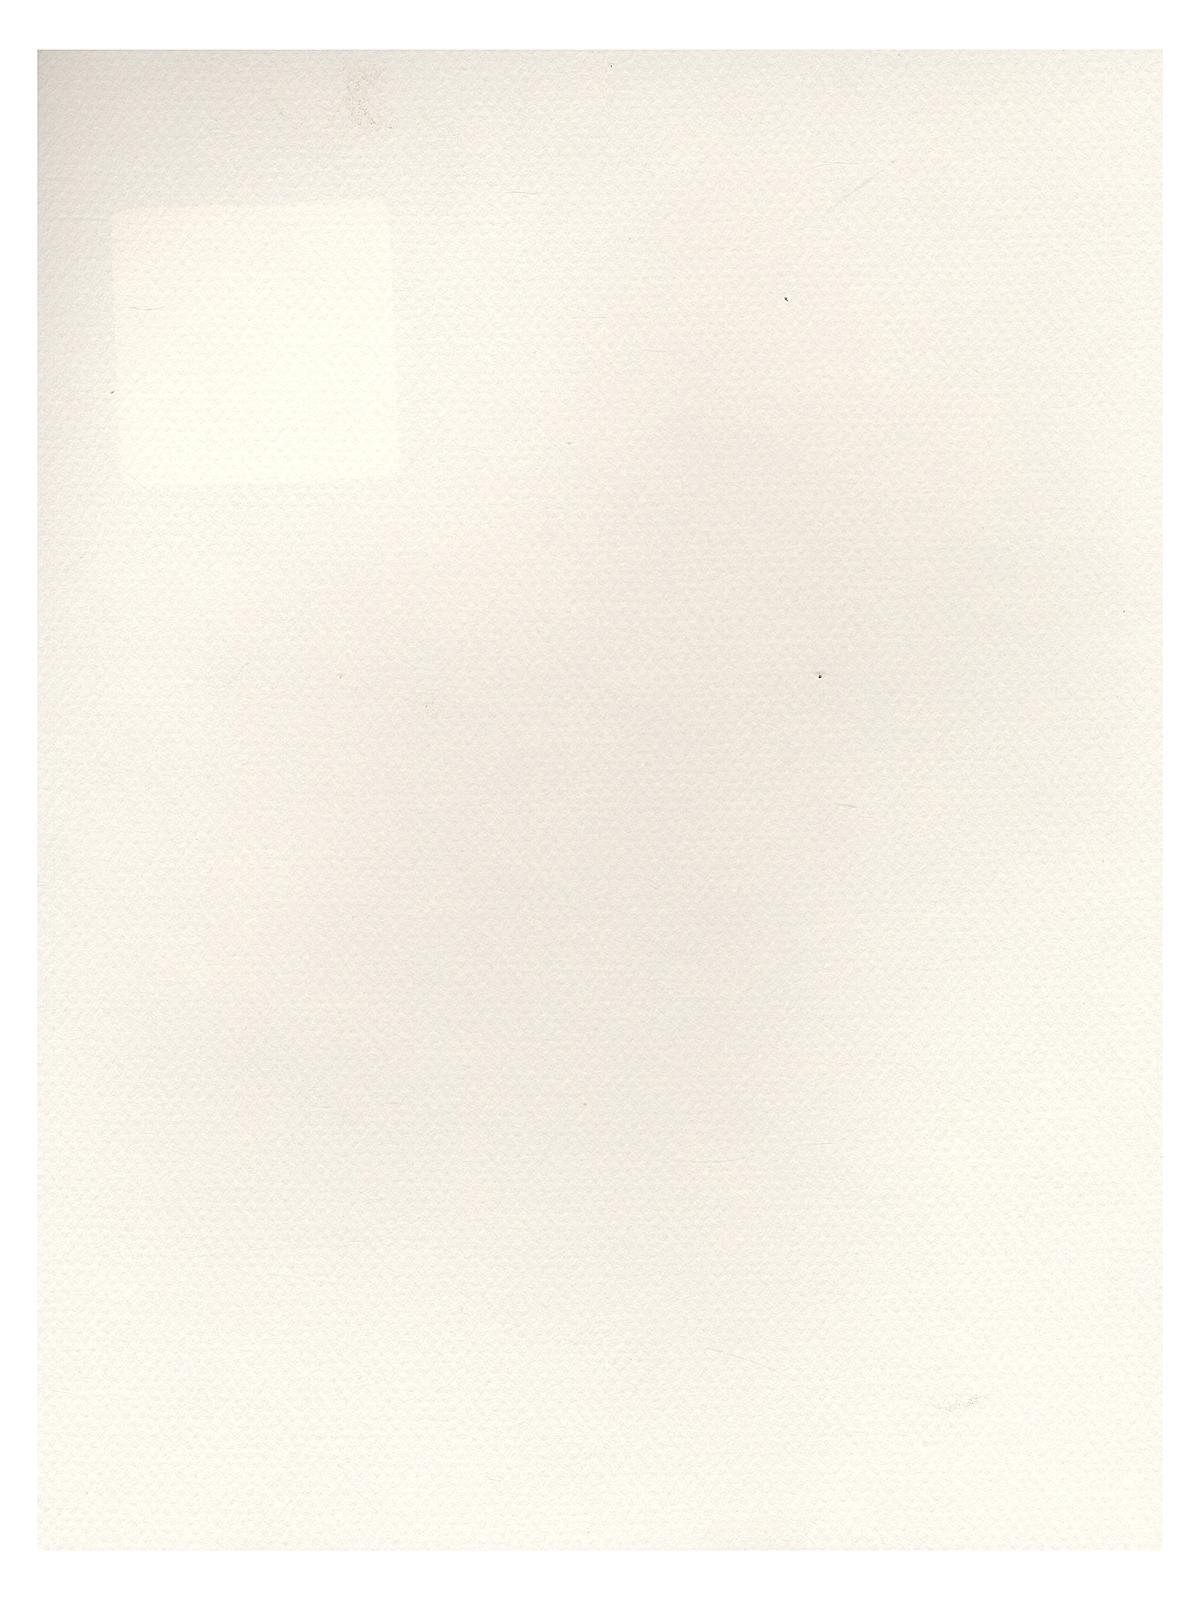 Mi-teintes Tinted Paper White 8.5 In. X 11 In.